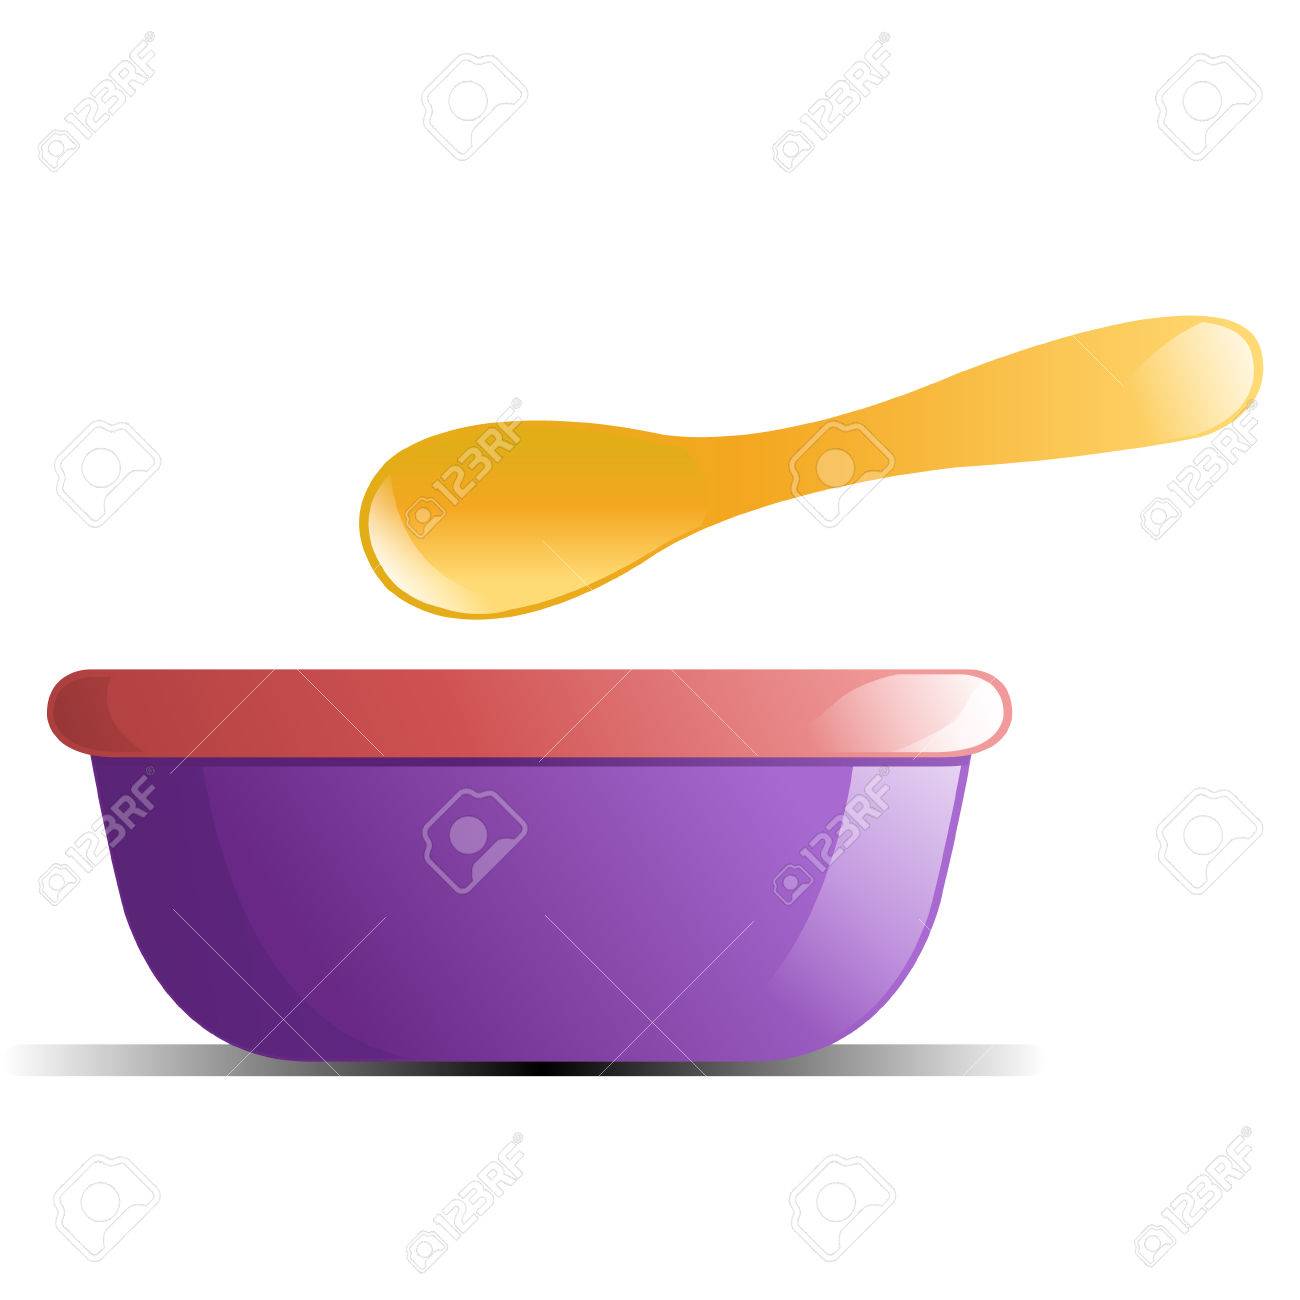 Purple and Pink Baby Bowl with Yellow Spoon.